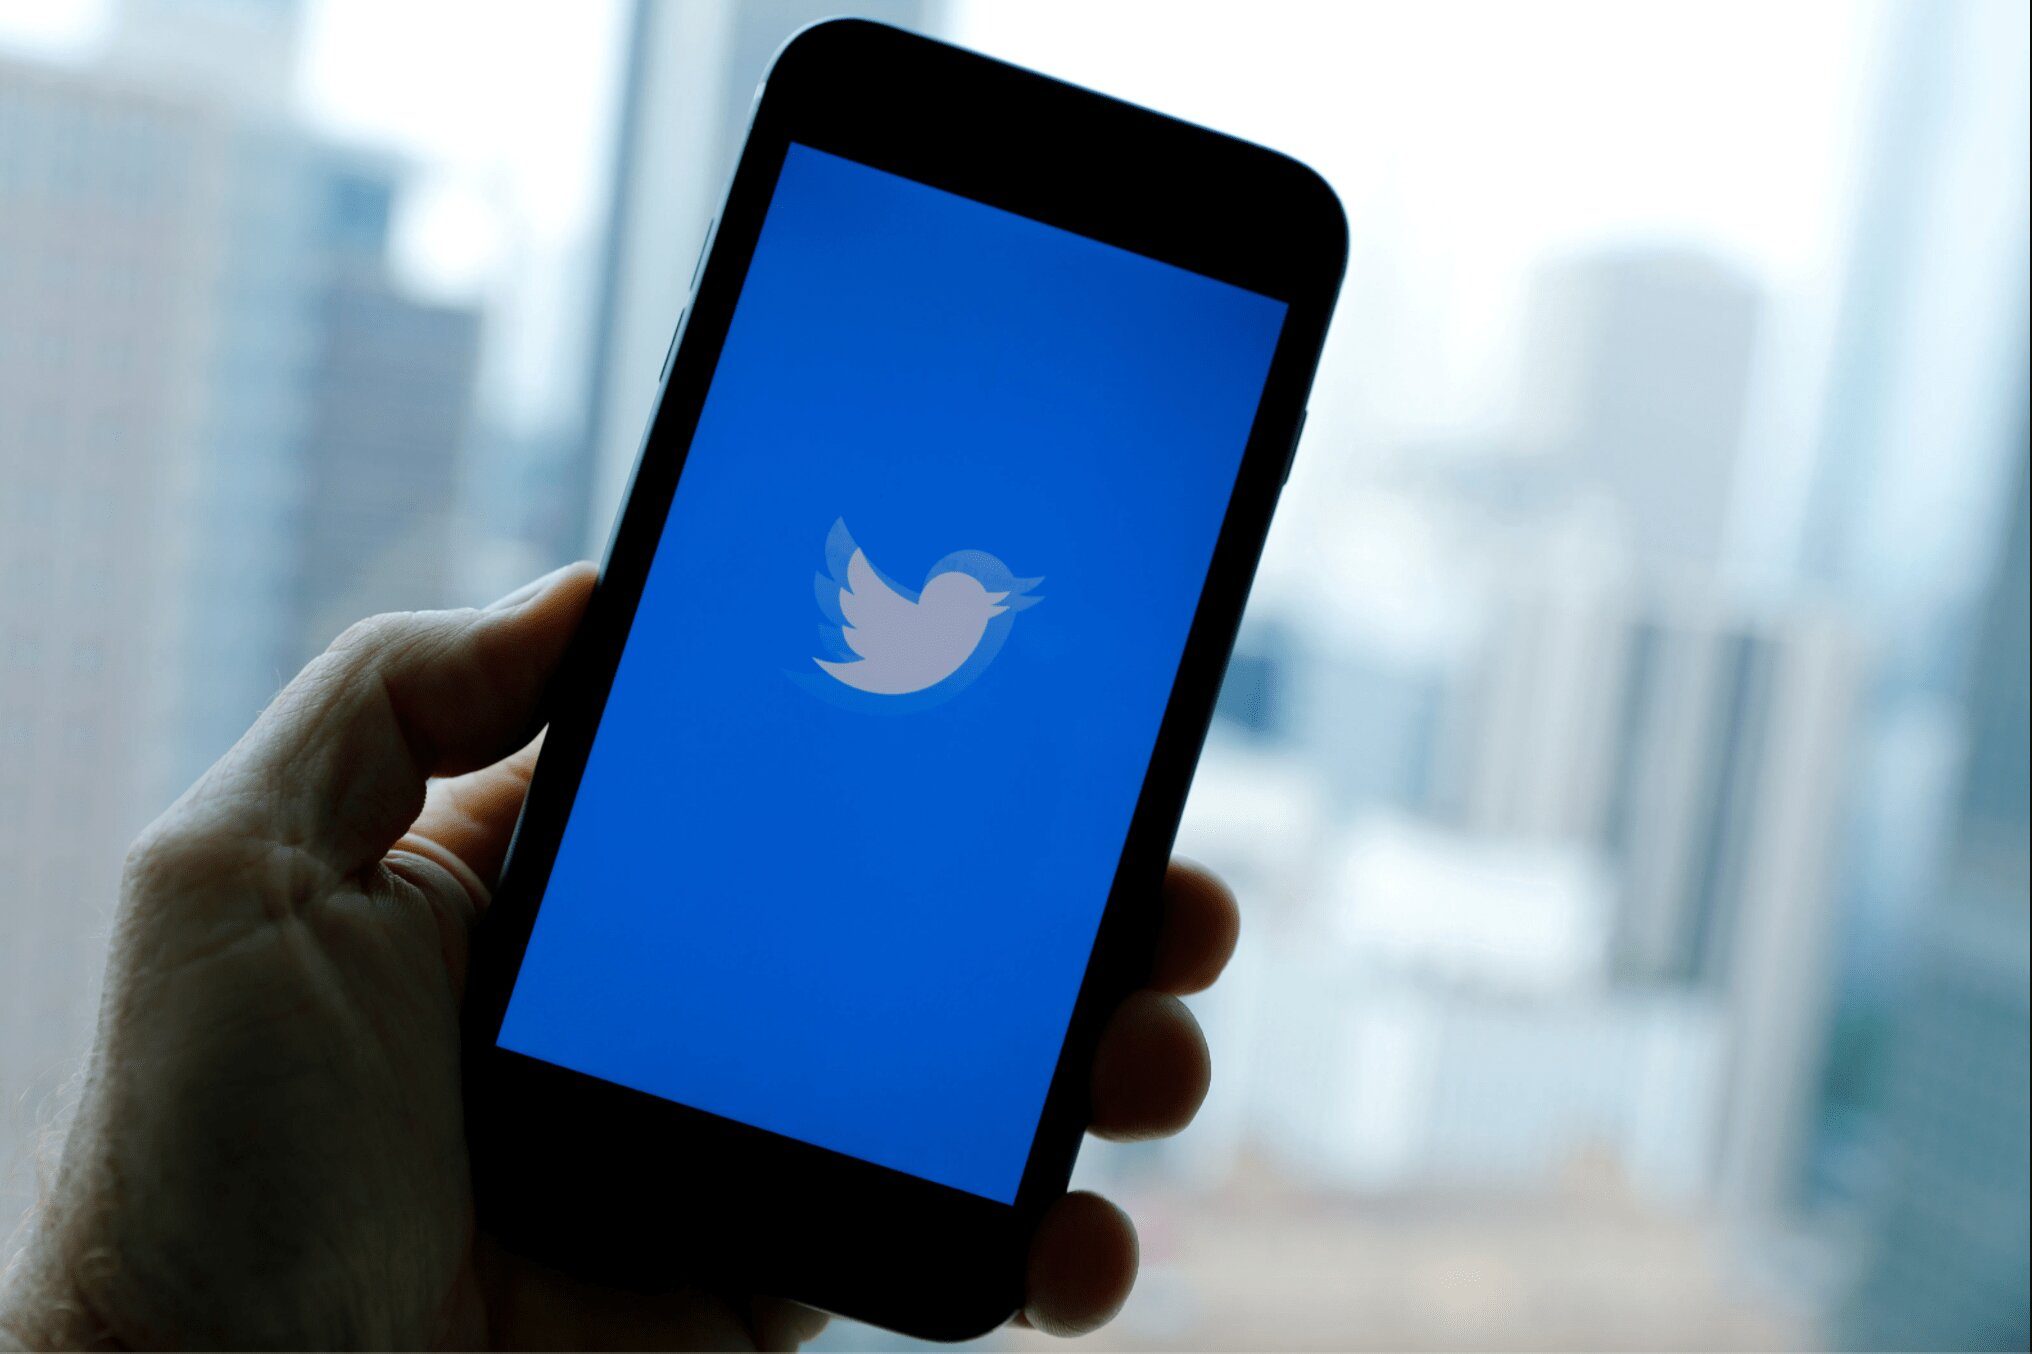 Twitter to start testing long-awaited edit feature in coming months